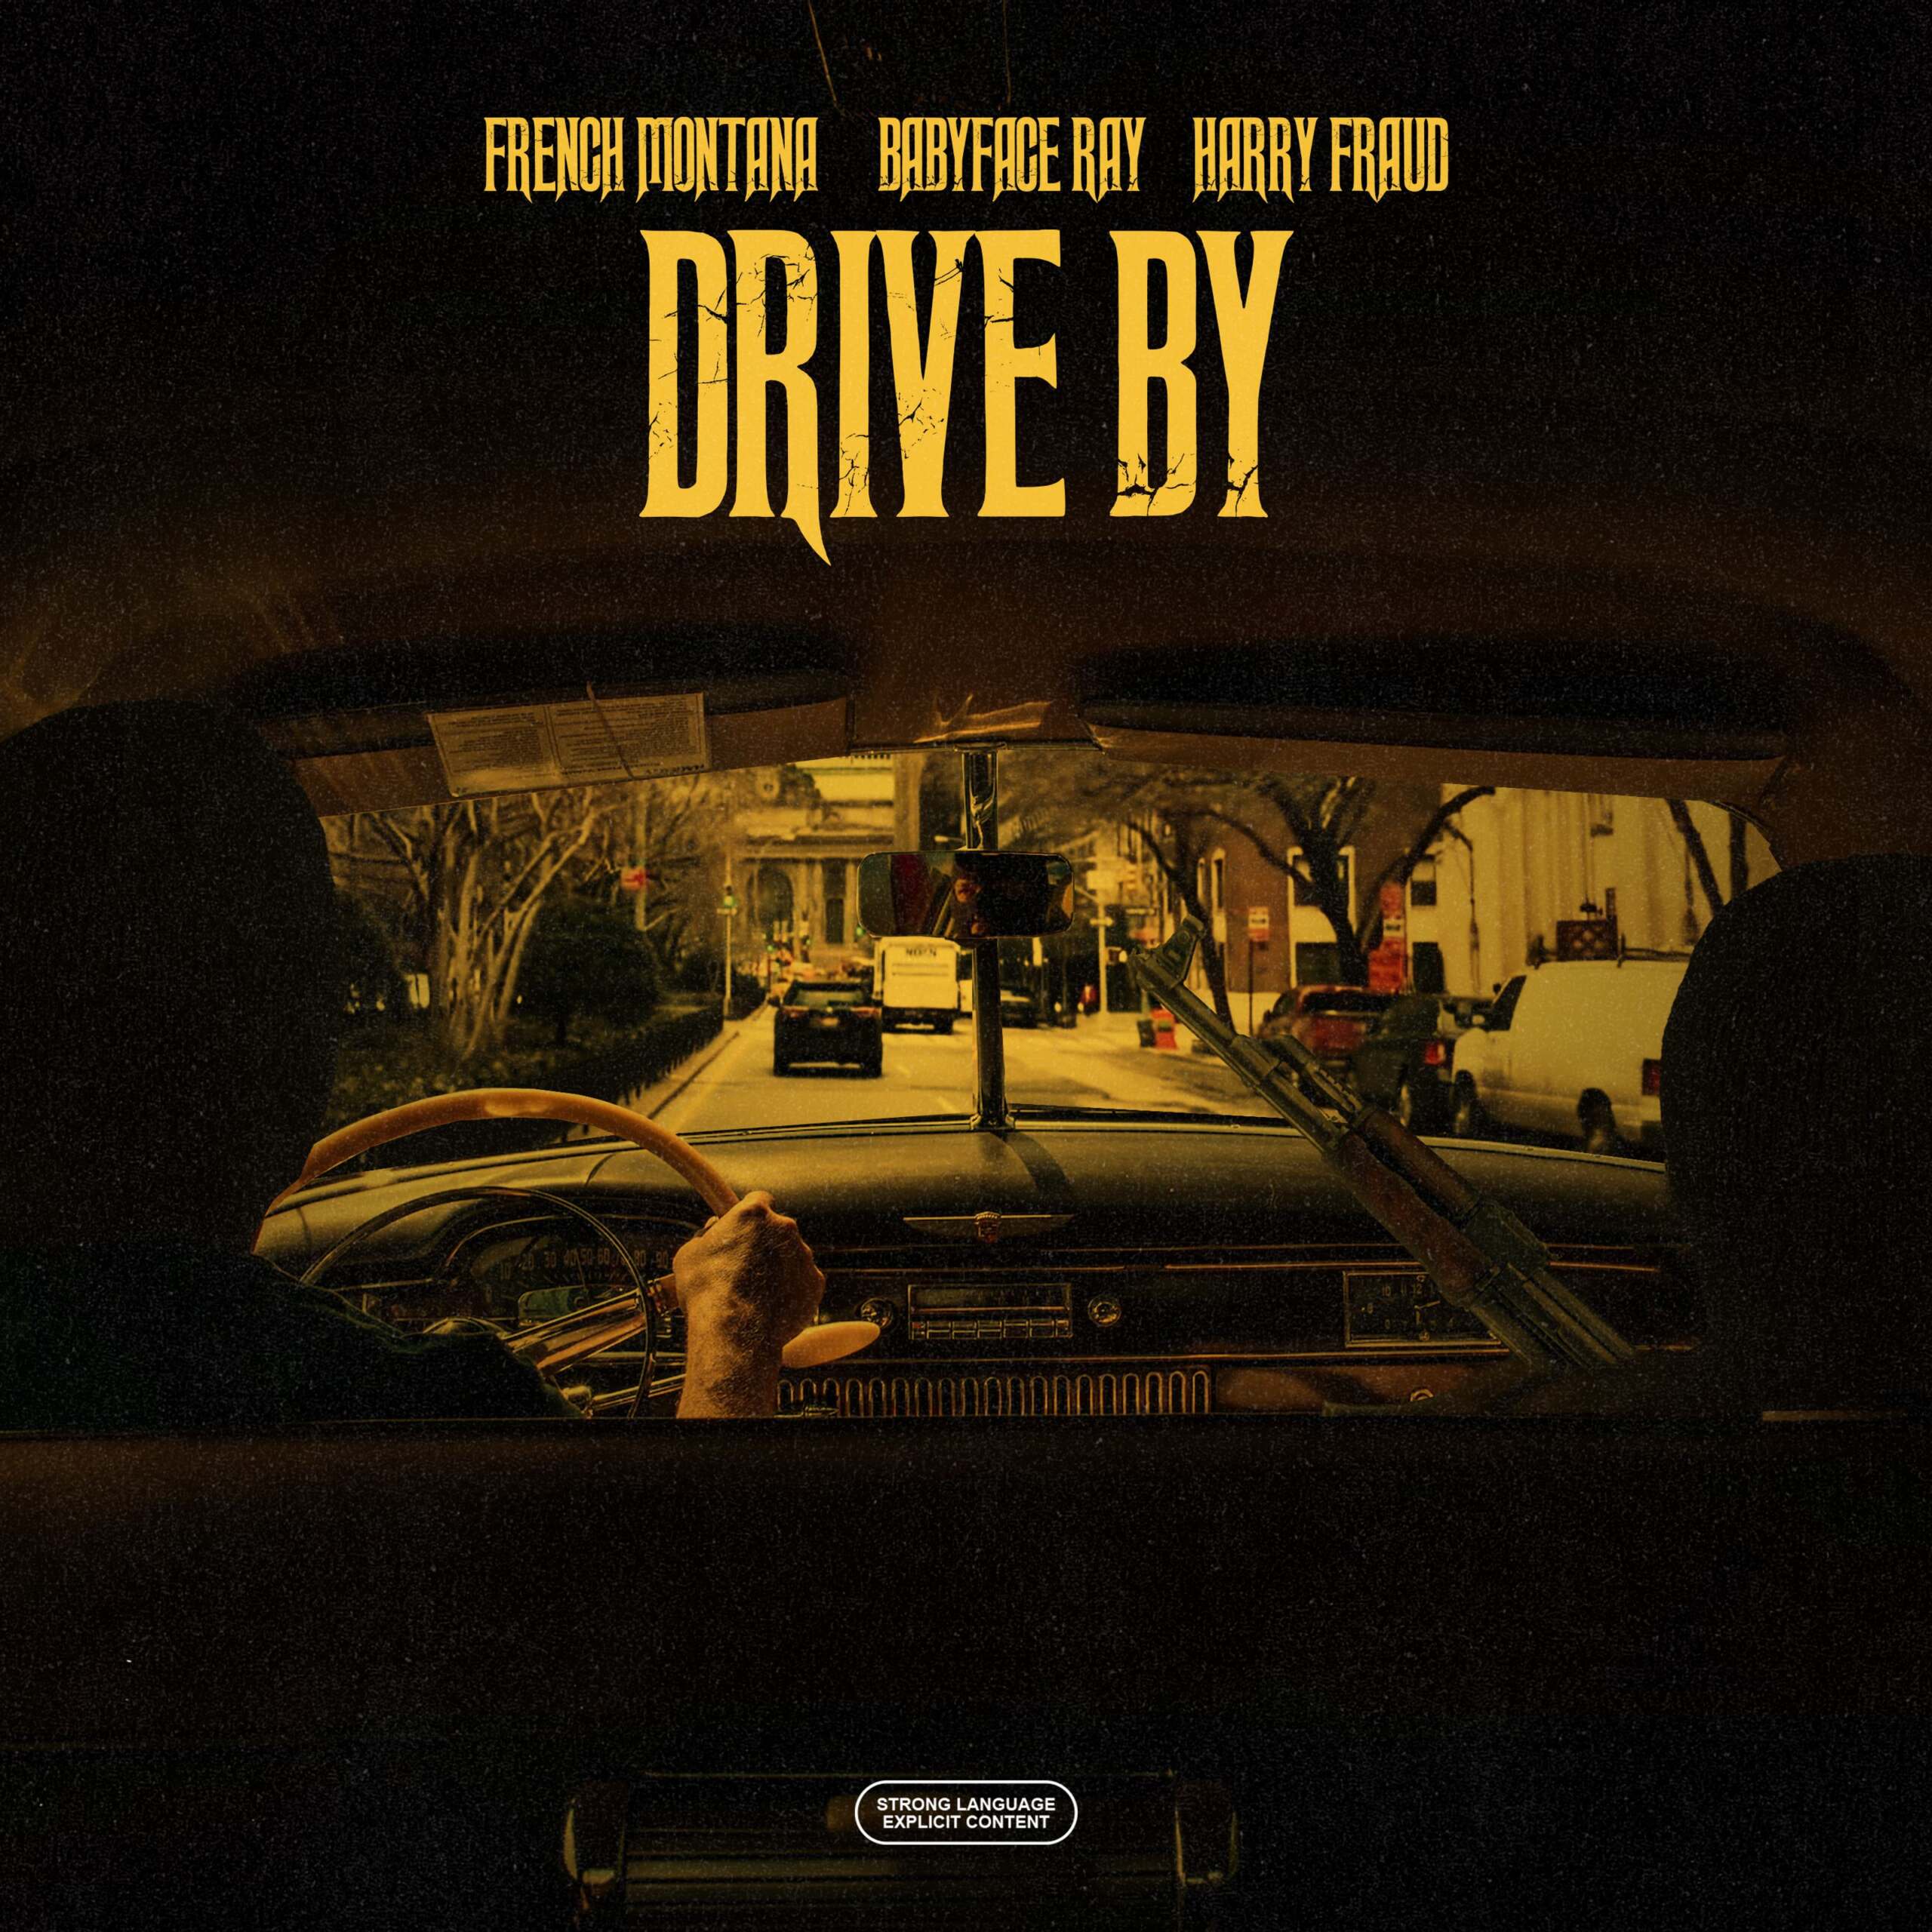 French Montana & Harry Fraud feat. Babyface Ray "Drive By" (Audio)